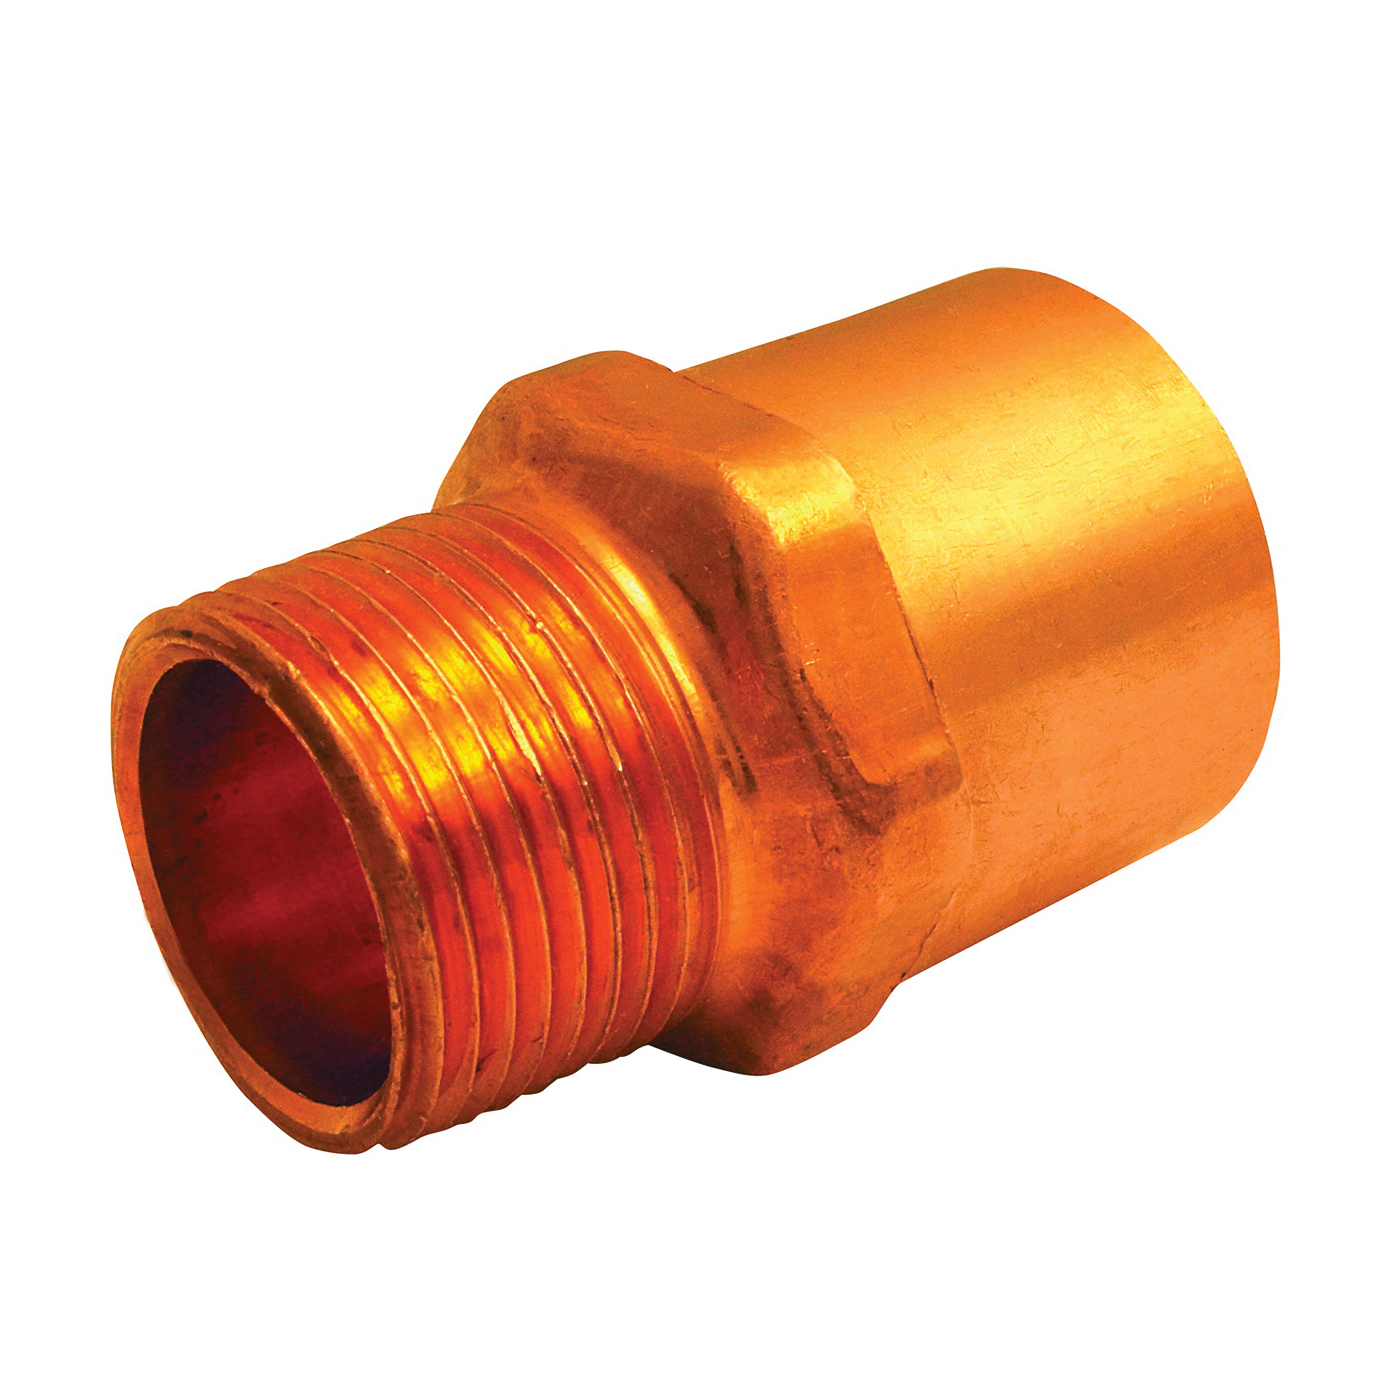 104R Series 30304 Reducing Pipe Adapter, 3/8 x 1/2 in, Sweat x MNPT, Copper